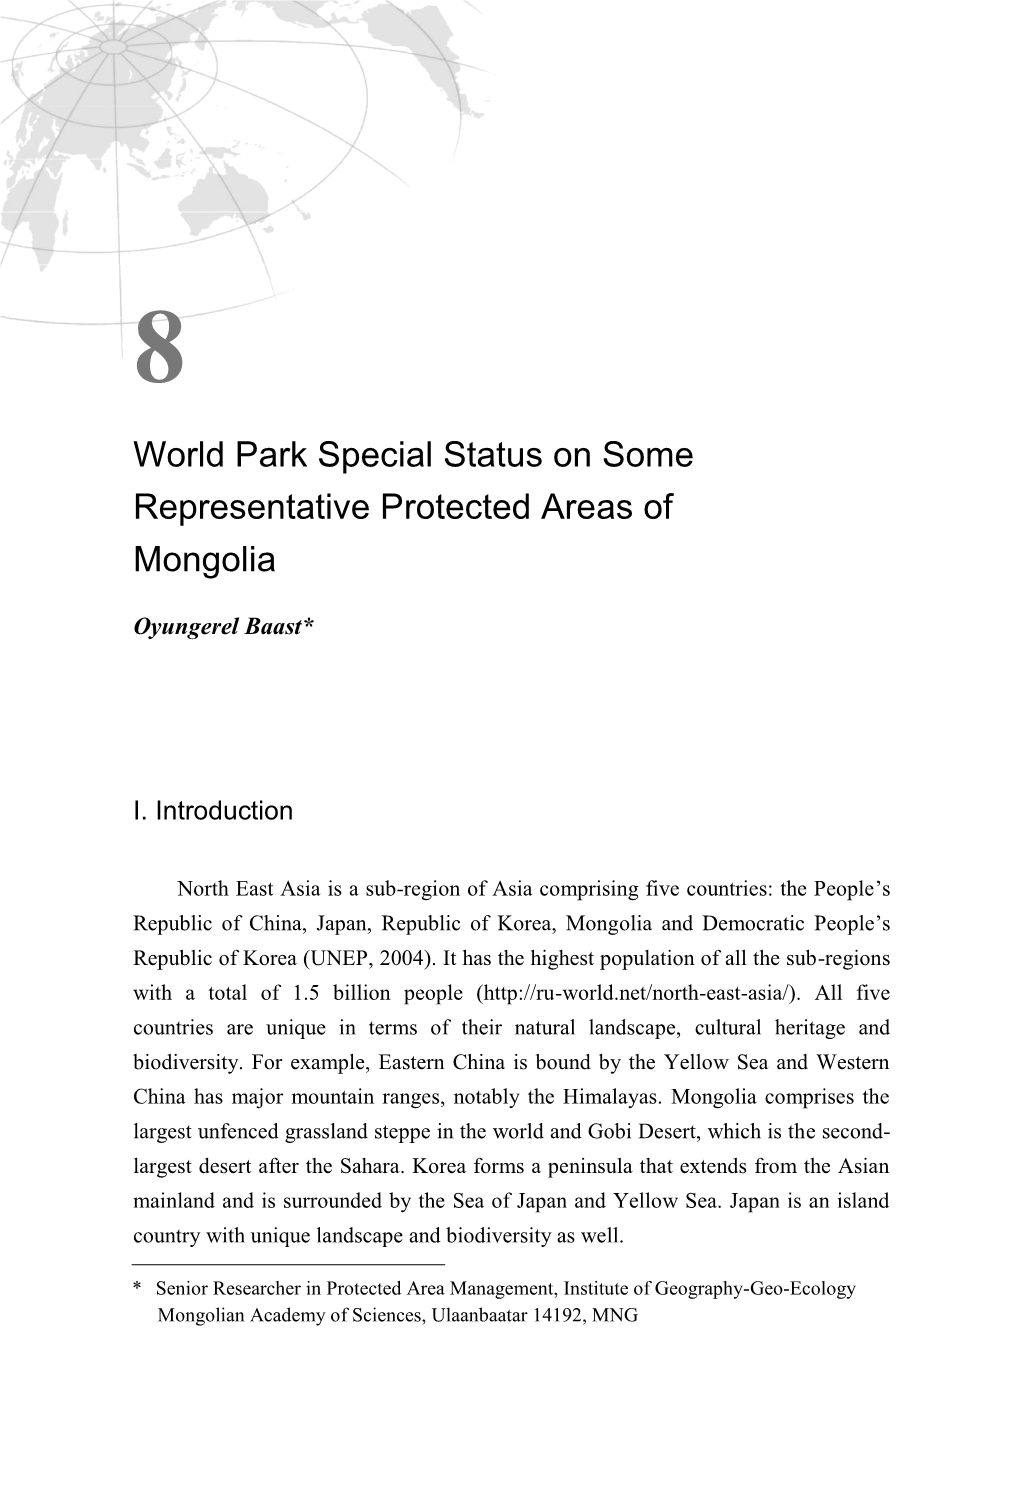 World Park Special Status on Some Representative Protected Areas of Mongolia